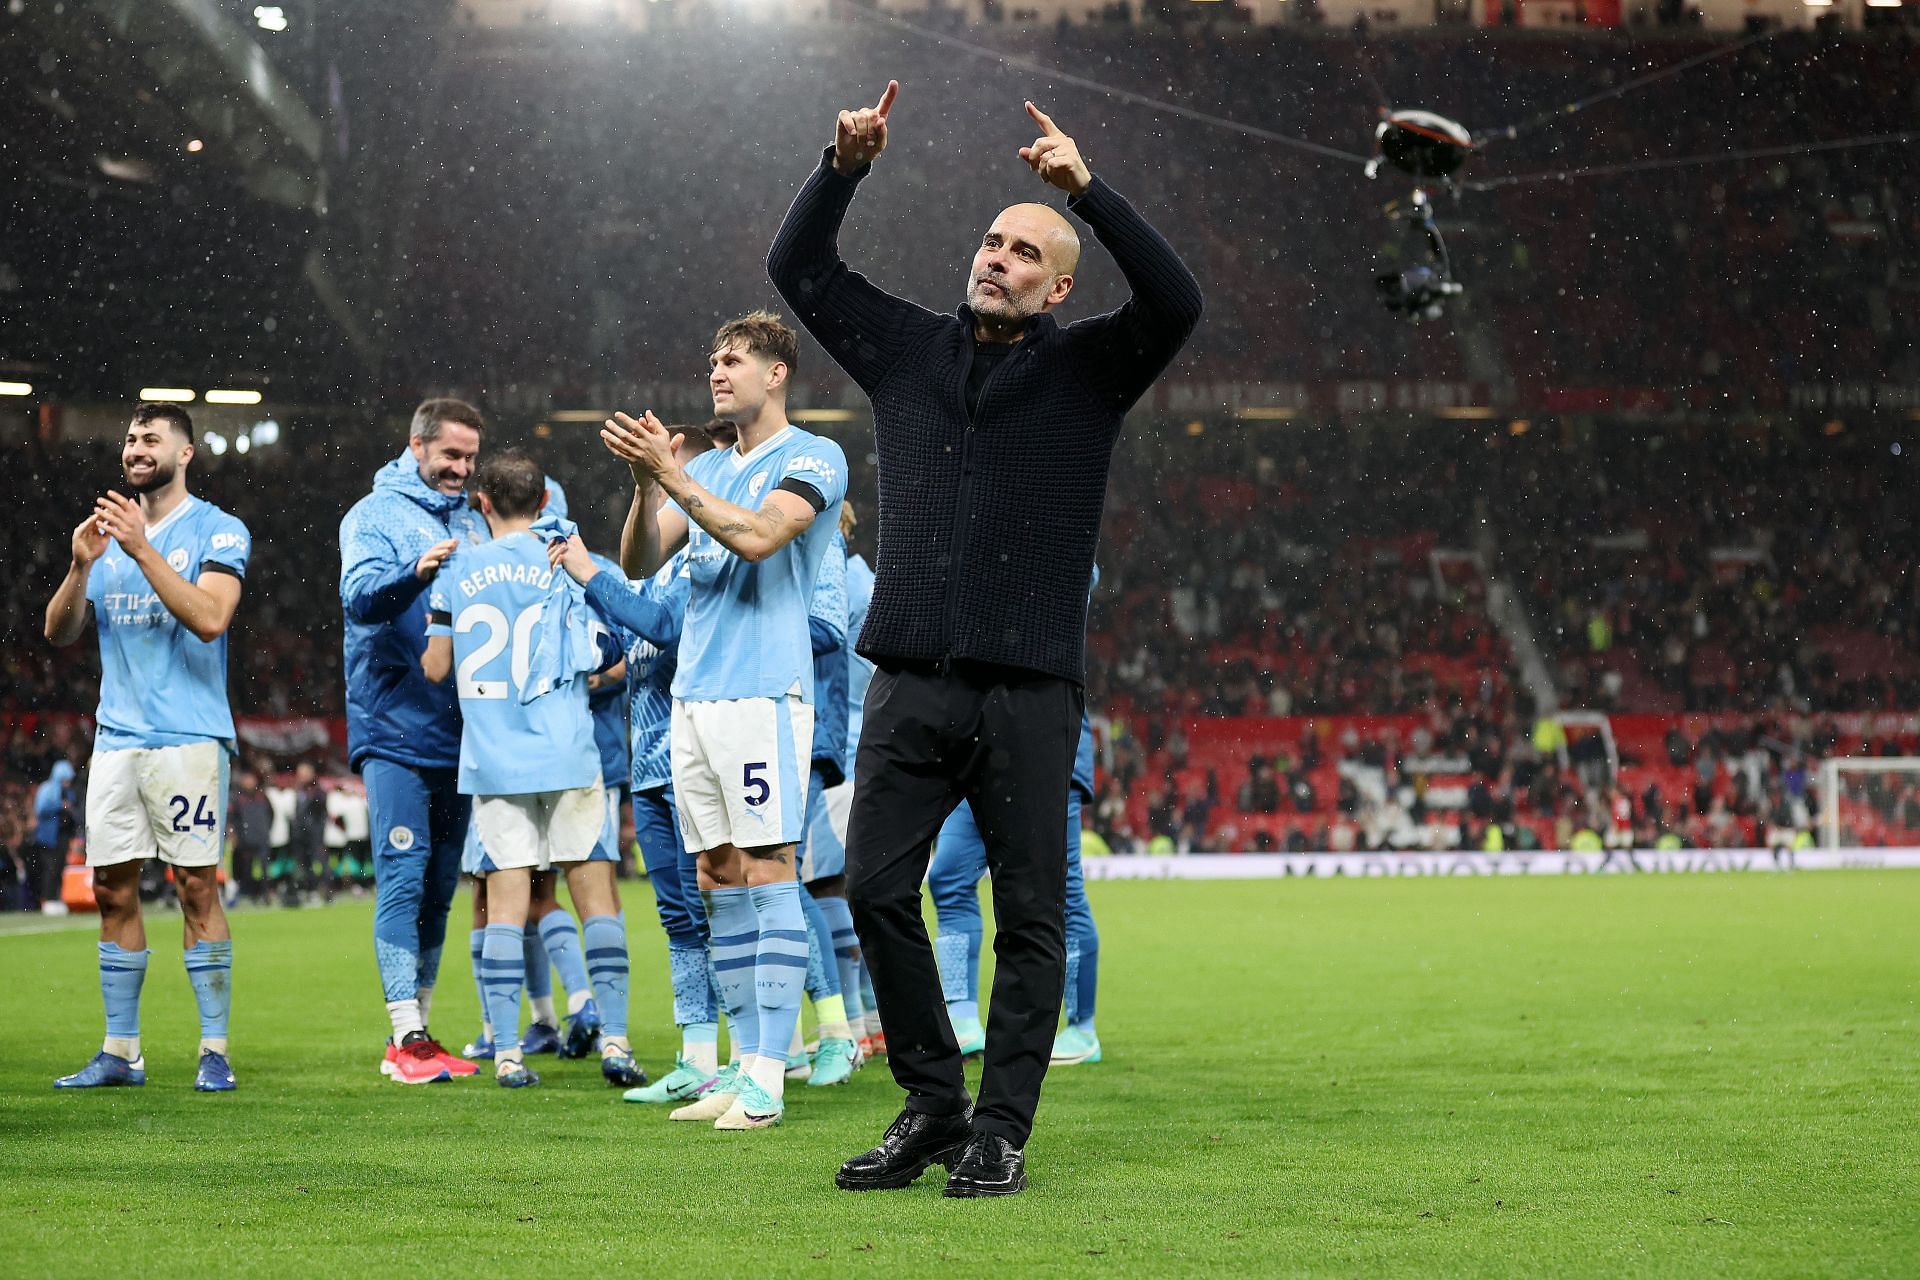 Pep Guardiola has dominated English football with Manchester City.